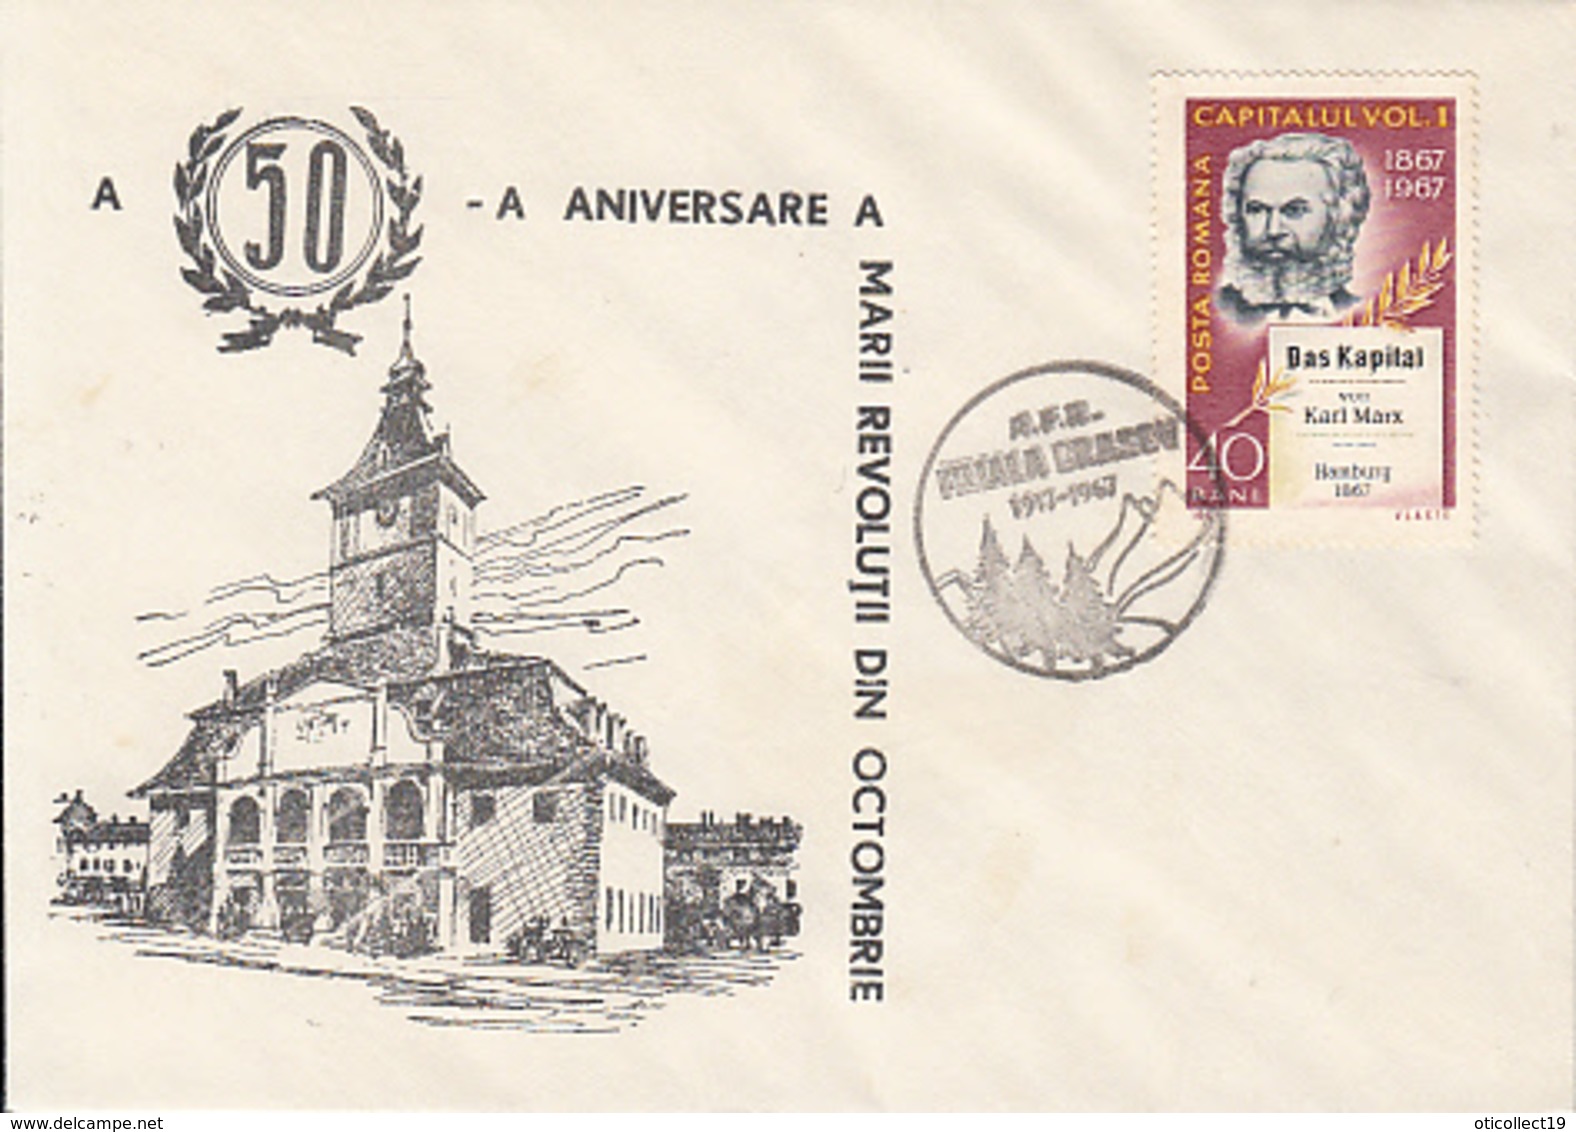 GREAT OCTOBER SOCIALIST REVOLUTION ANNIVERSARY, SPECIAL COVER, KARL MARX STAMP, 1967, ROMANIA - Covers & Documents